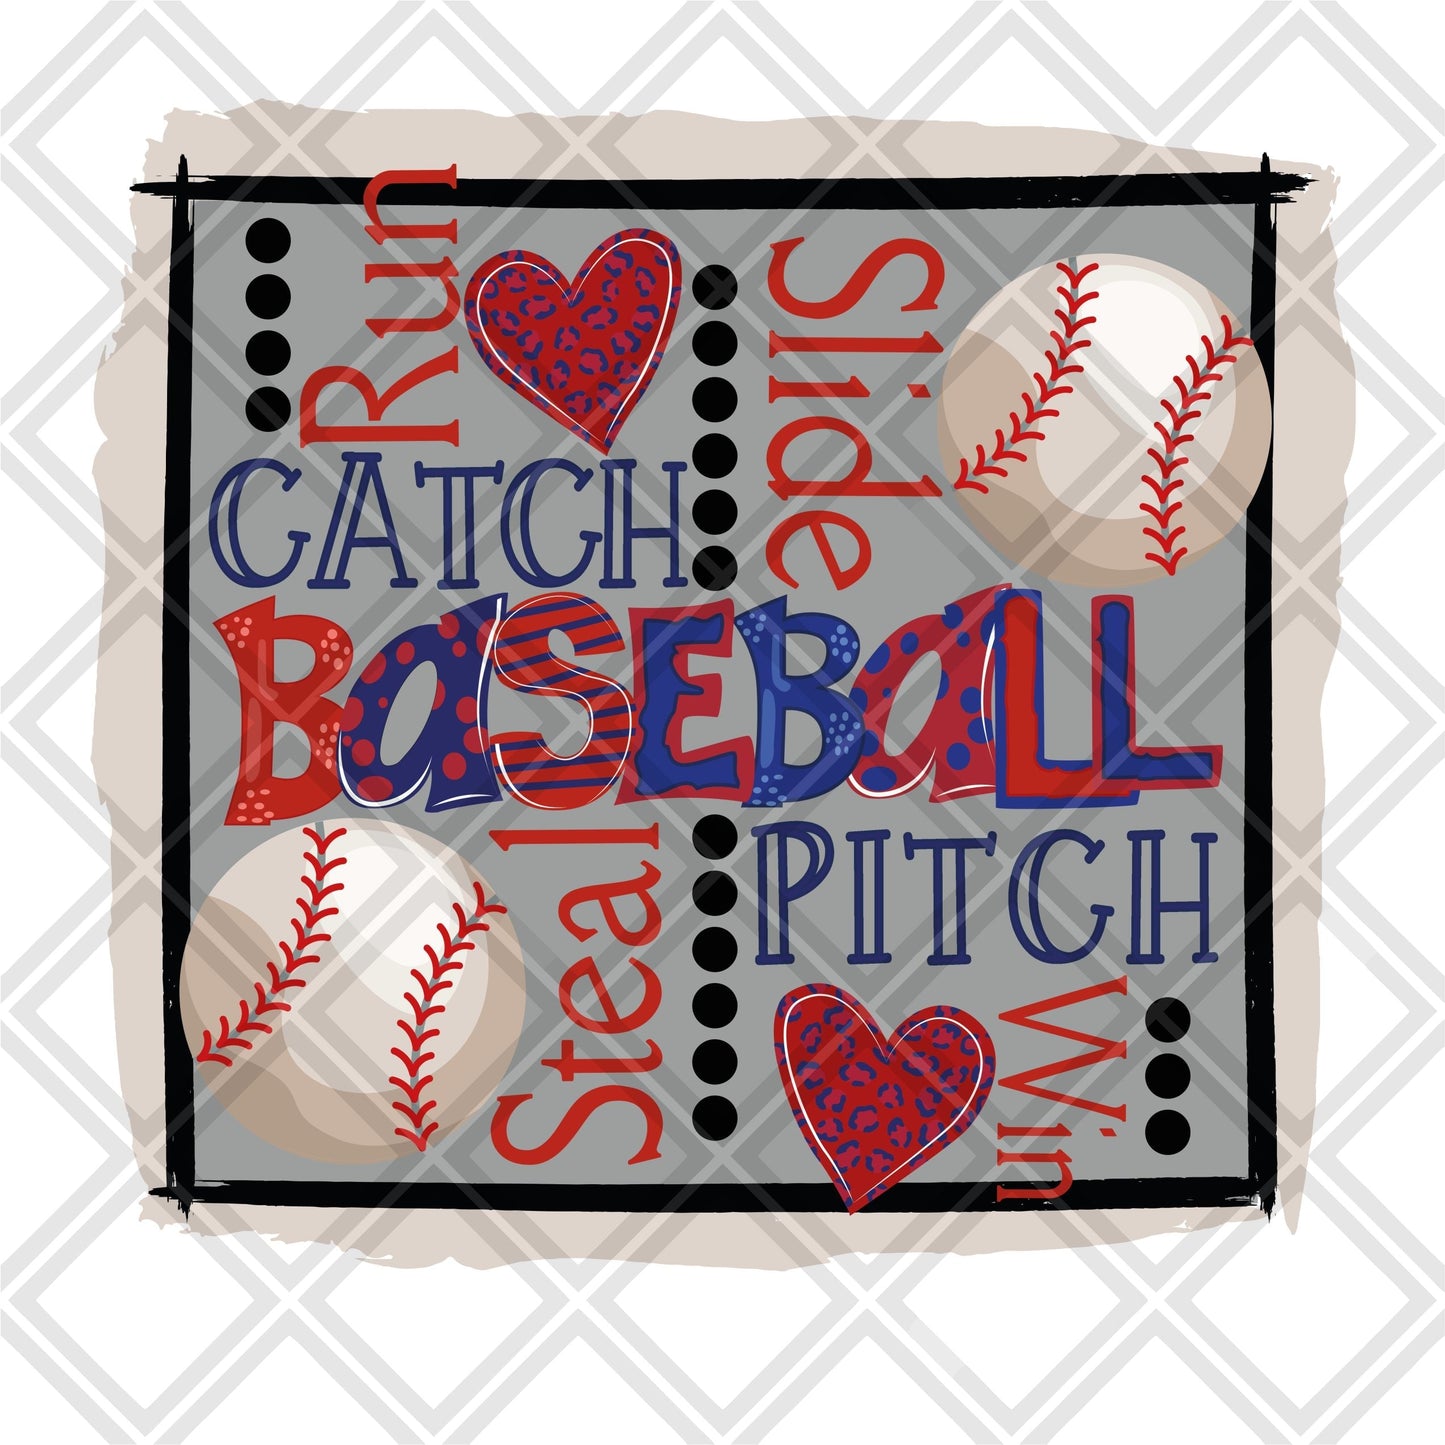 Baseball Catch Pitch steal win run slide DTF TRANSFERSPRINT TO ORDER